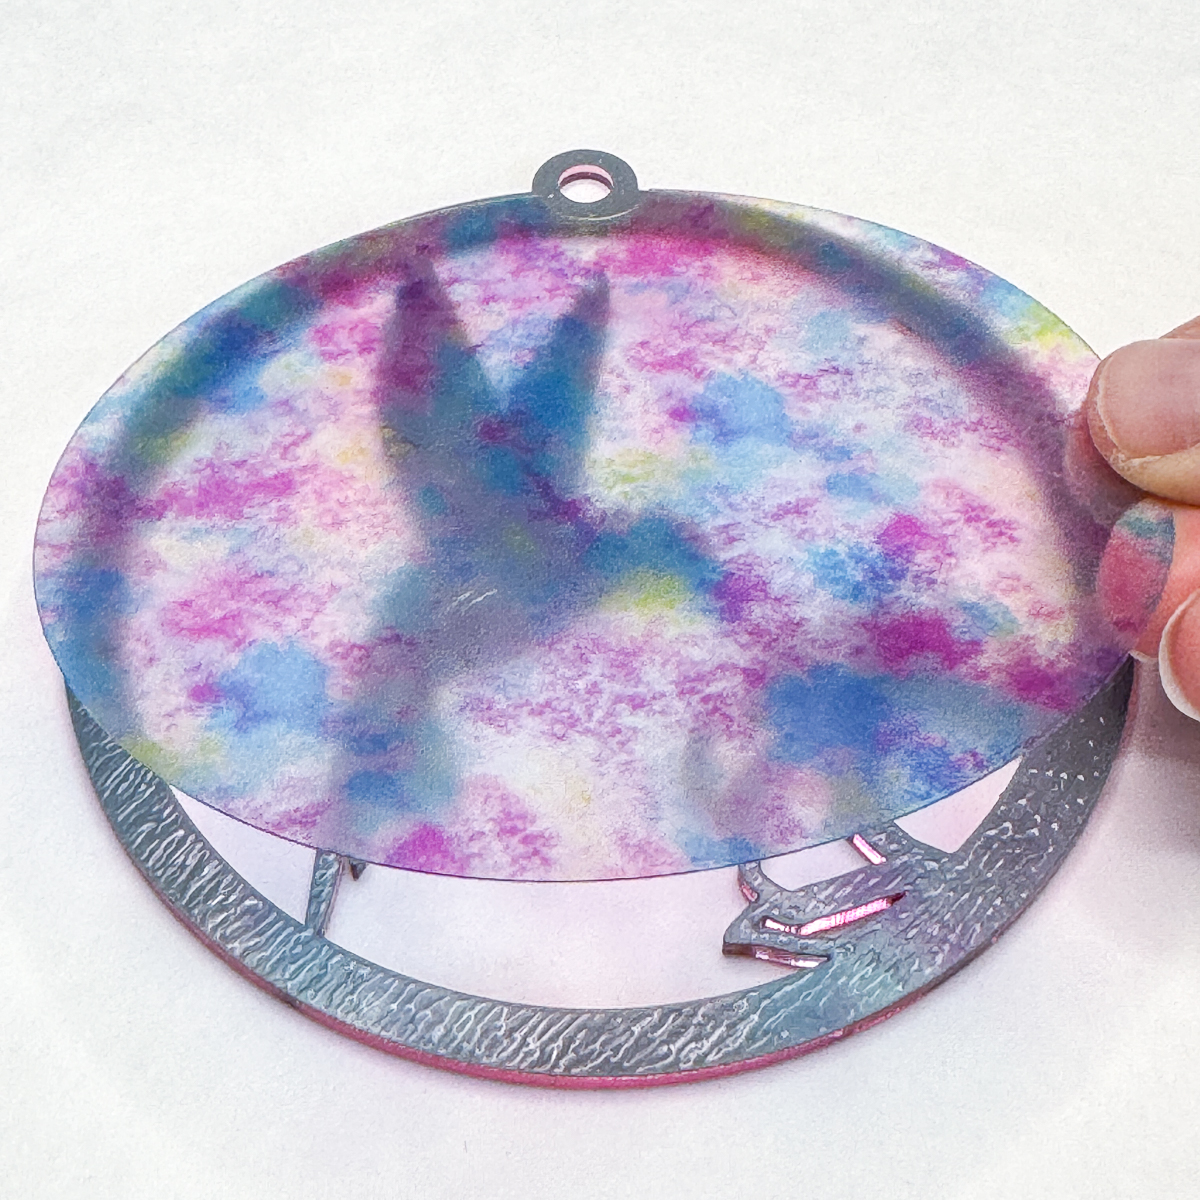 adding the translucent layer to the back of the pink suncatcher